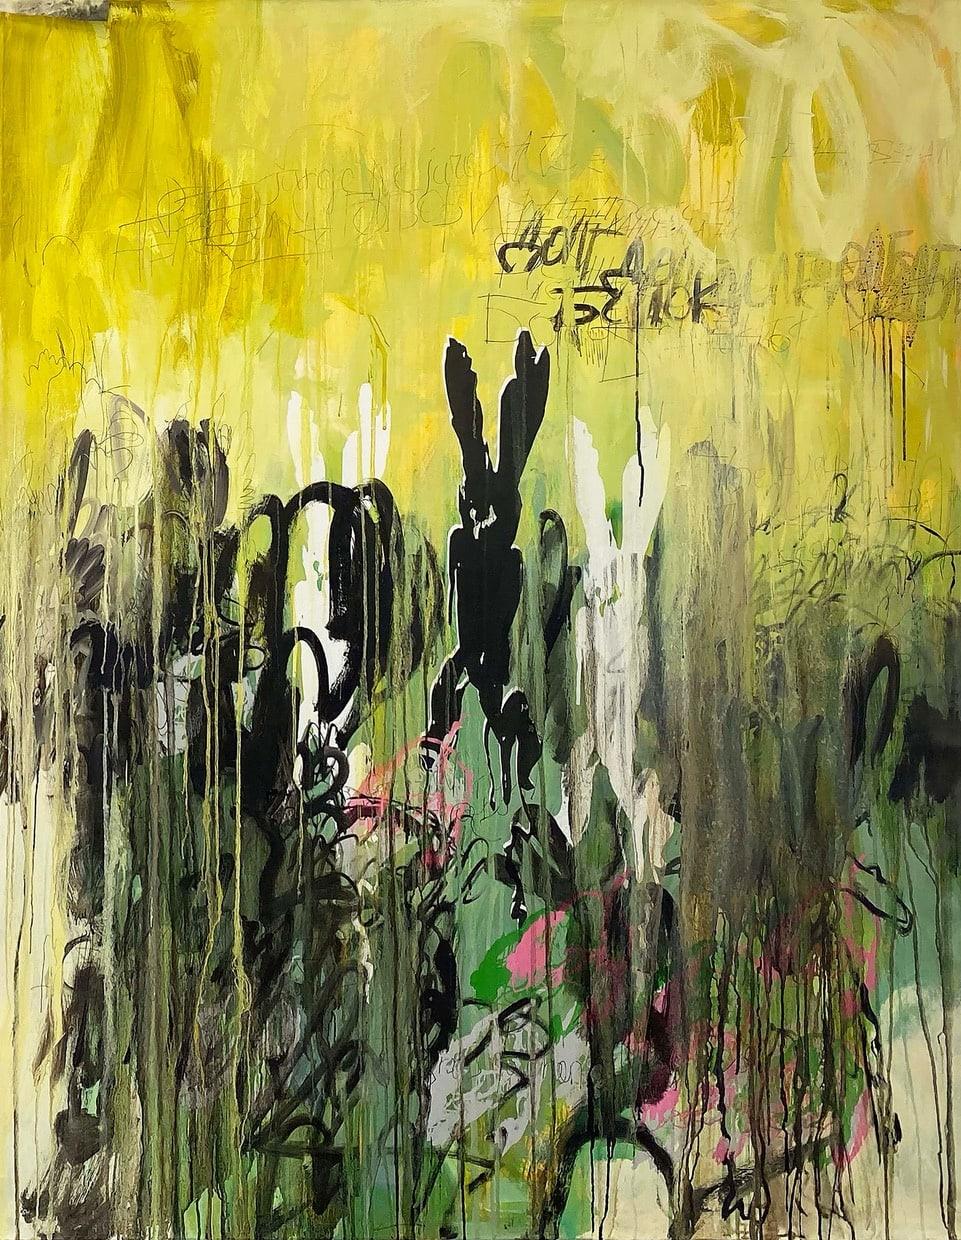 Rabbit's choice by Maria Cohen - Abstract painting, oil on canvas, 2021